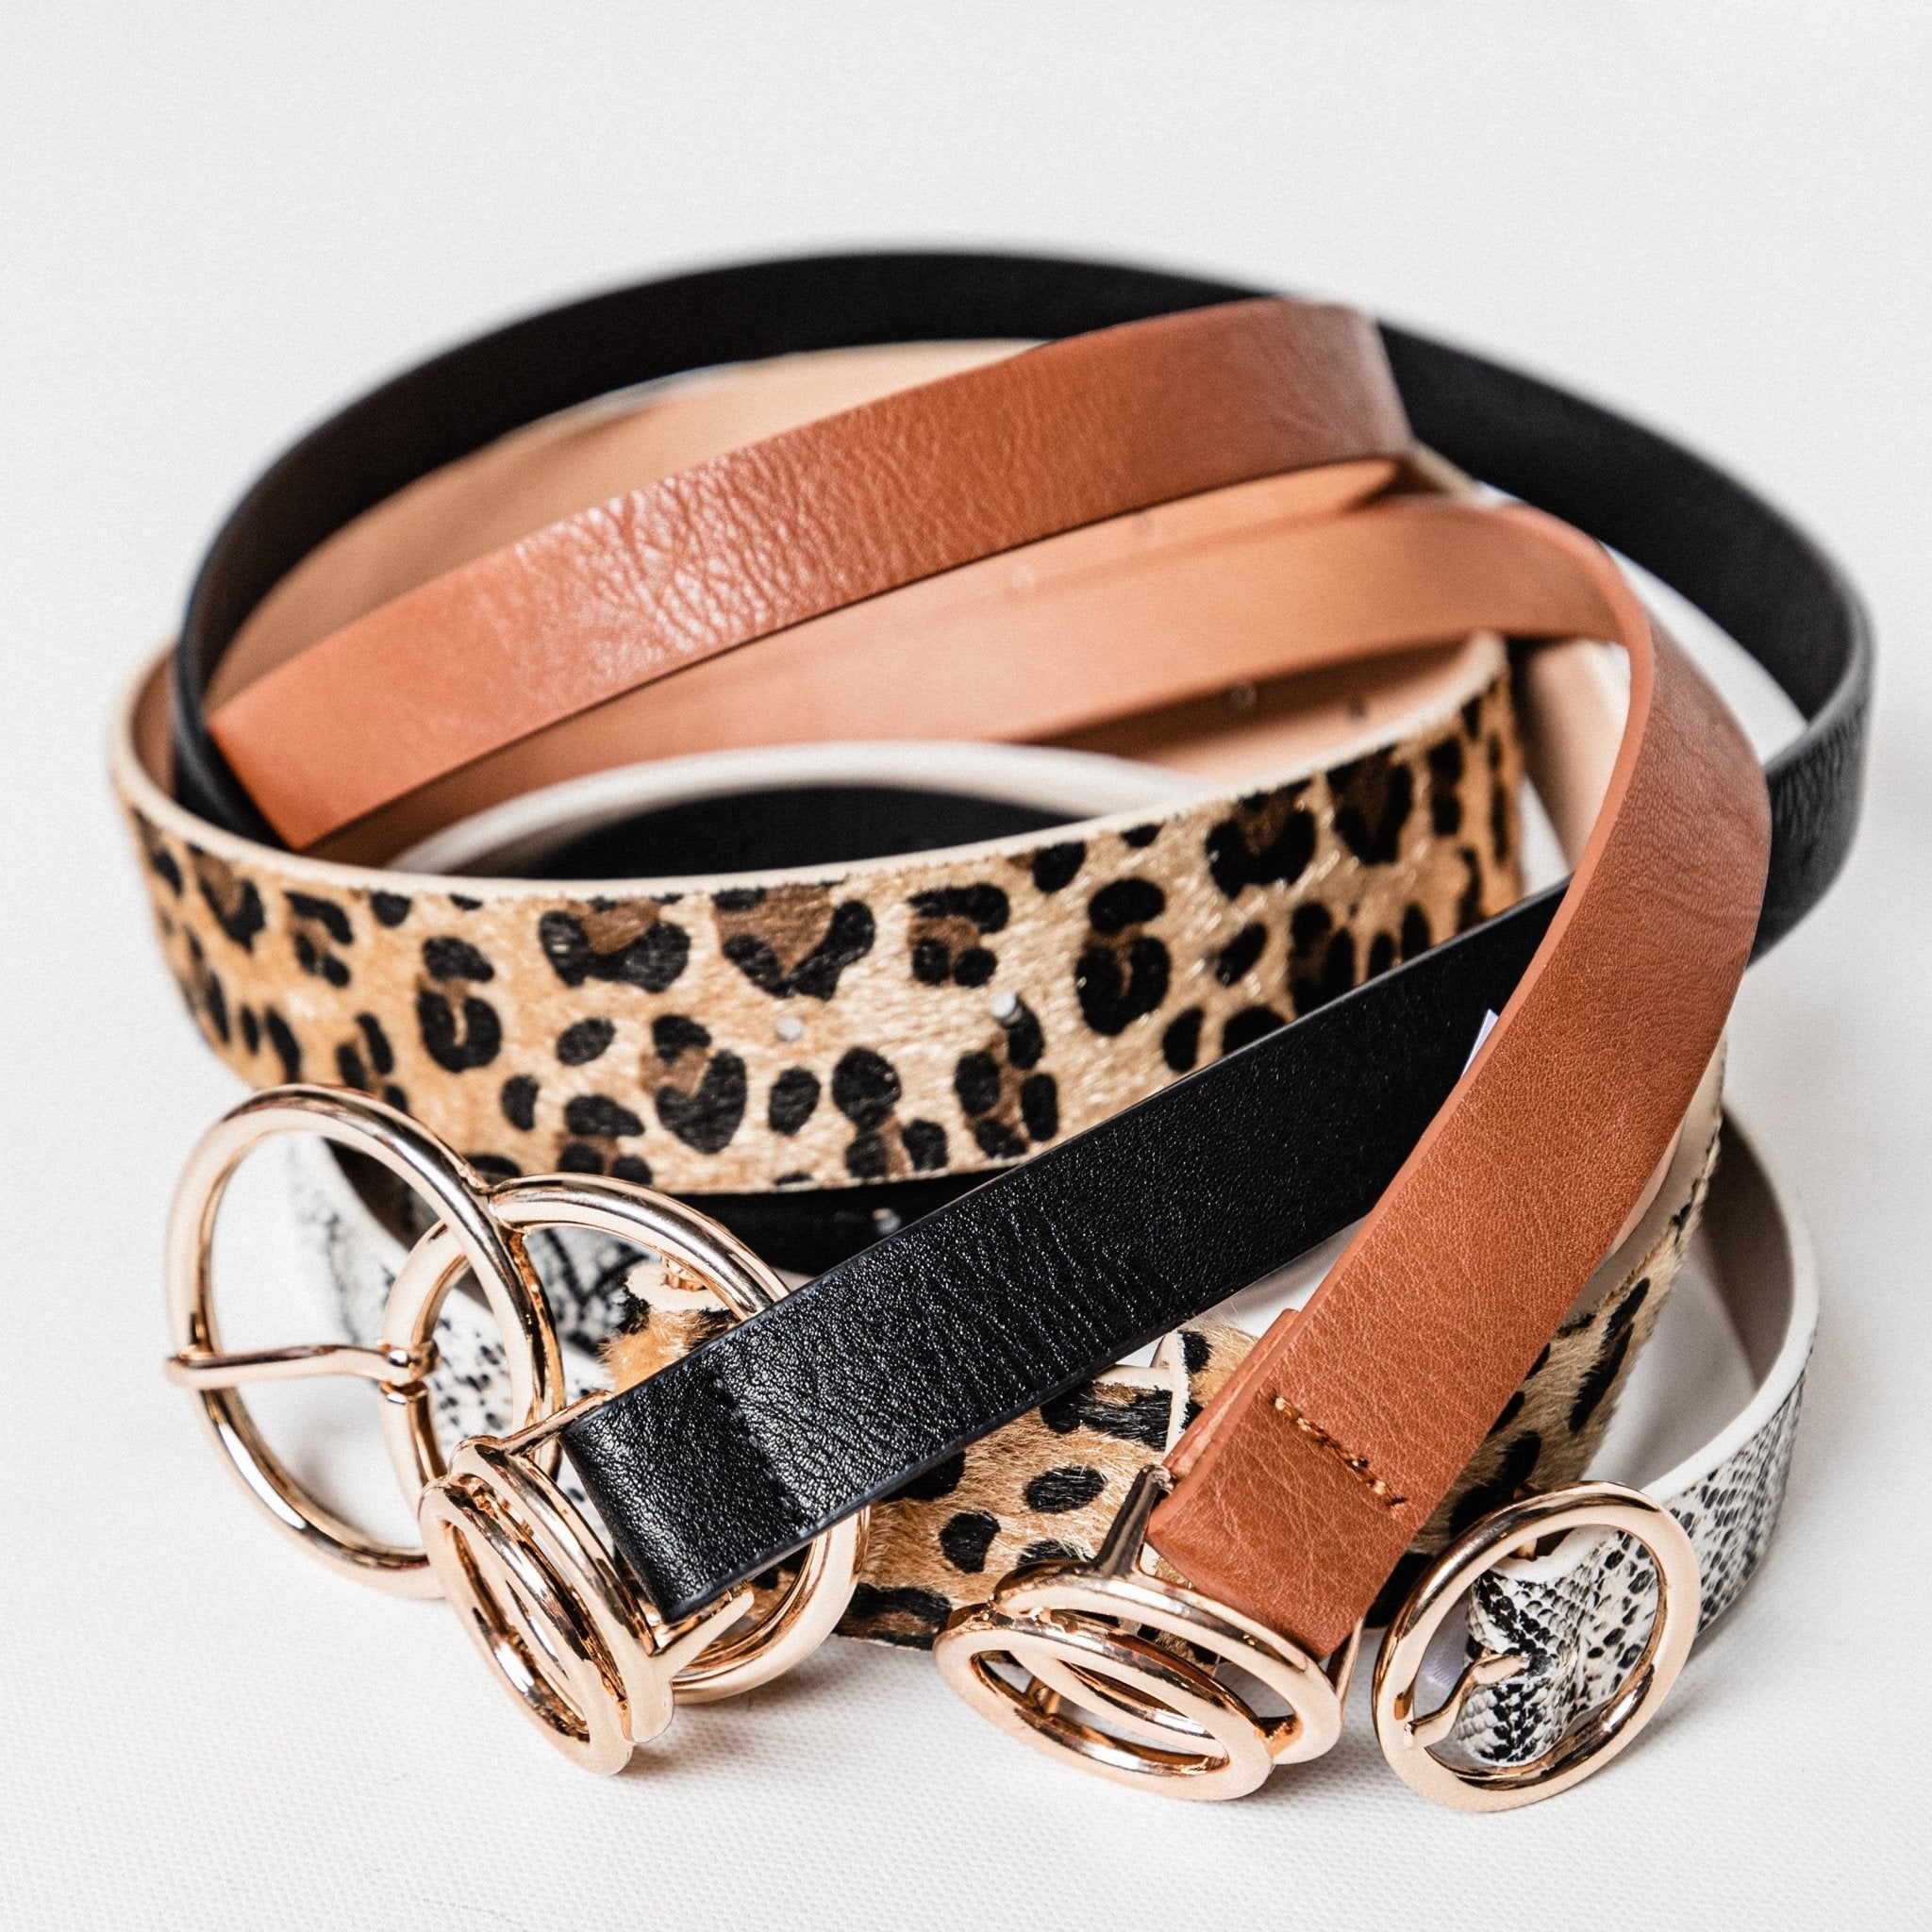 Jewelry + Belts | Lush Fashion Lounge: affordable women’s fashion jewelry, trendy boutique jewelry for women, cute fashion belts for women, affordable online boutiques USA, chic women’s clothing boutique. Photo of various women’s fashion belts